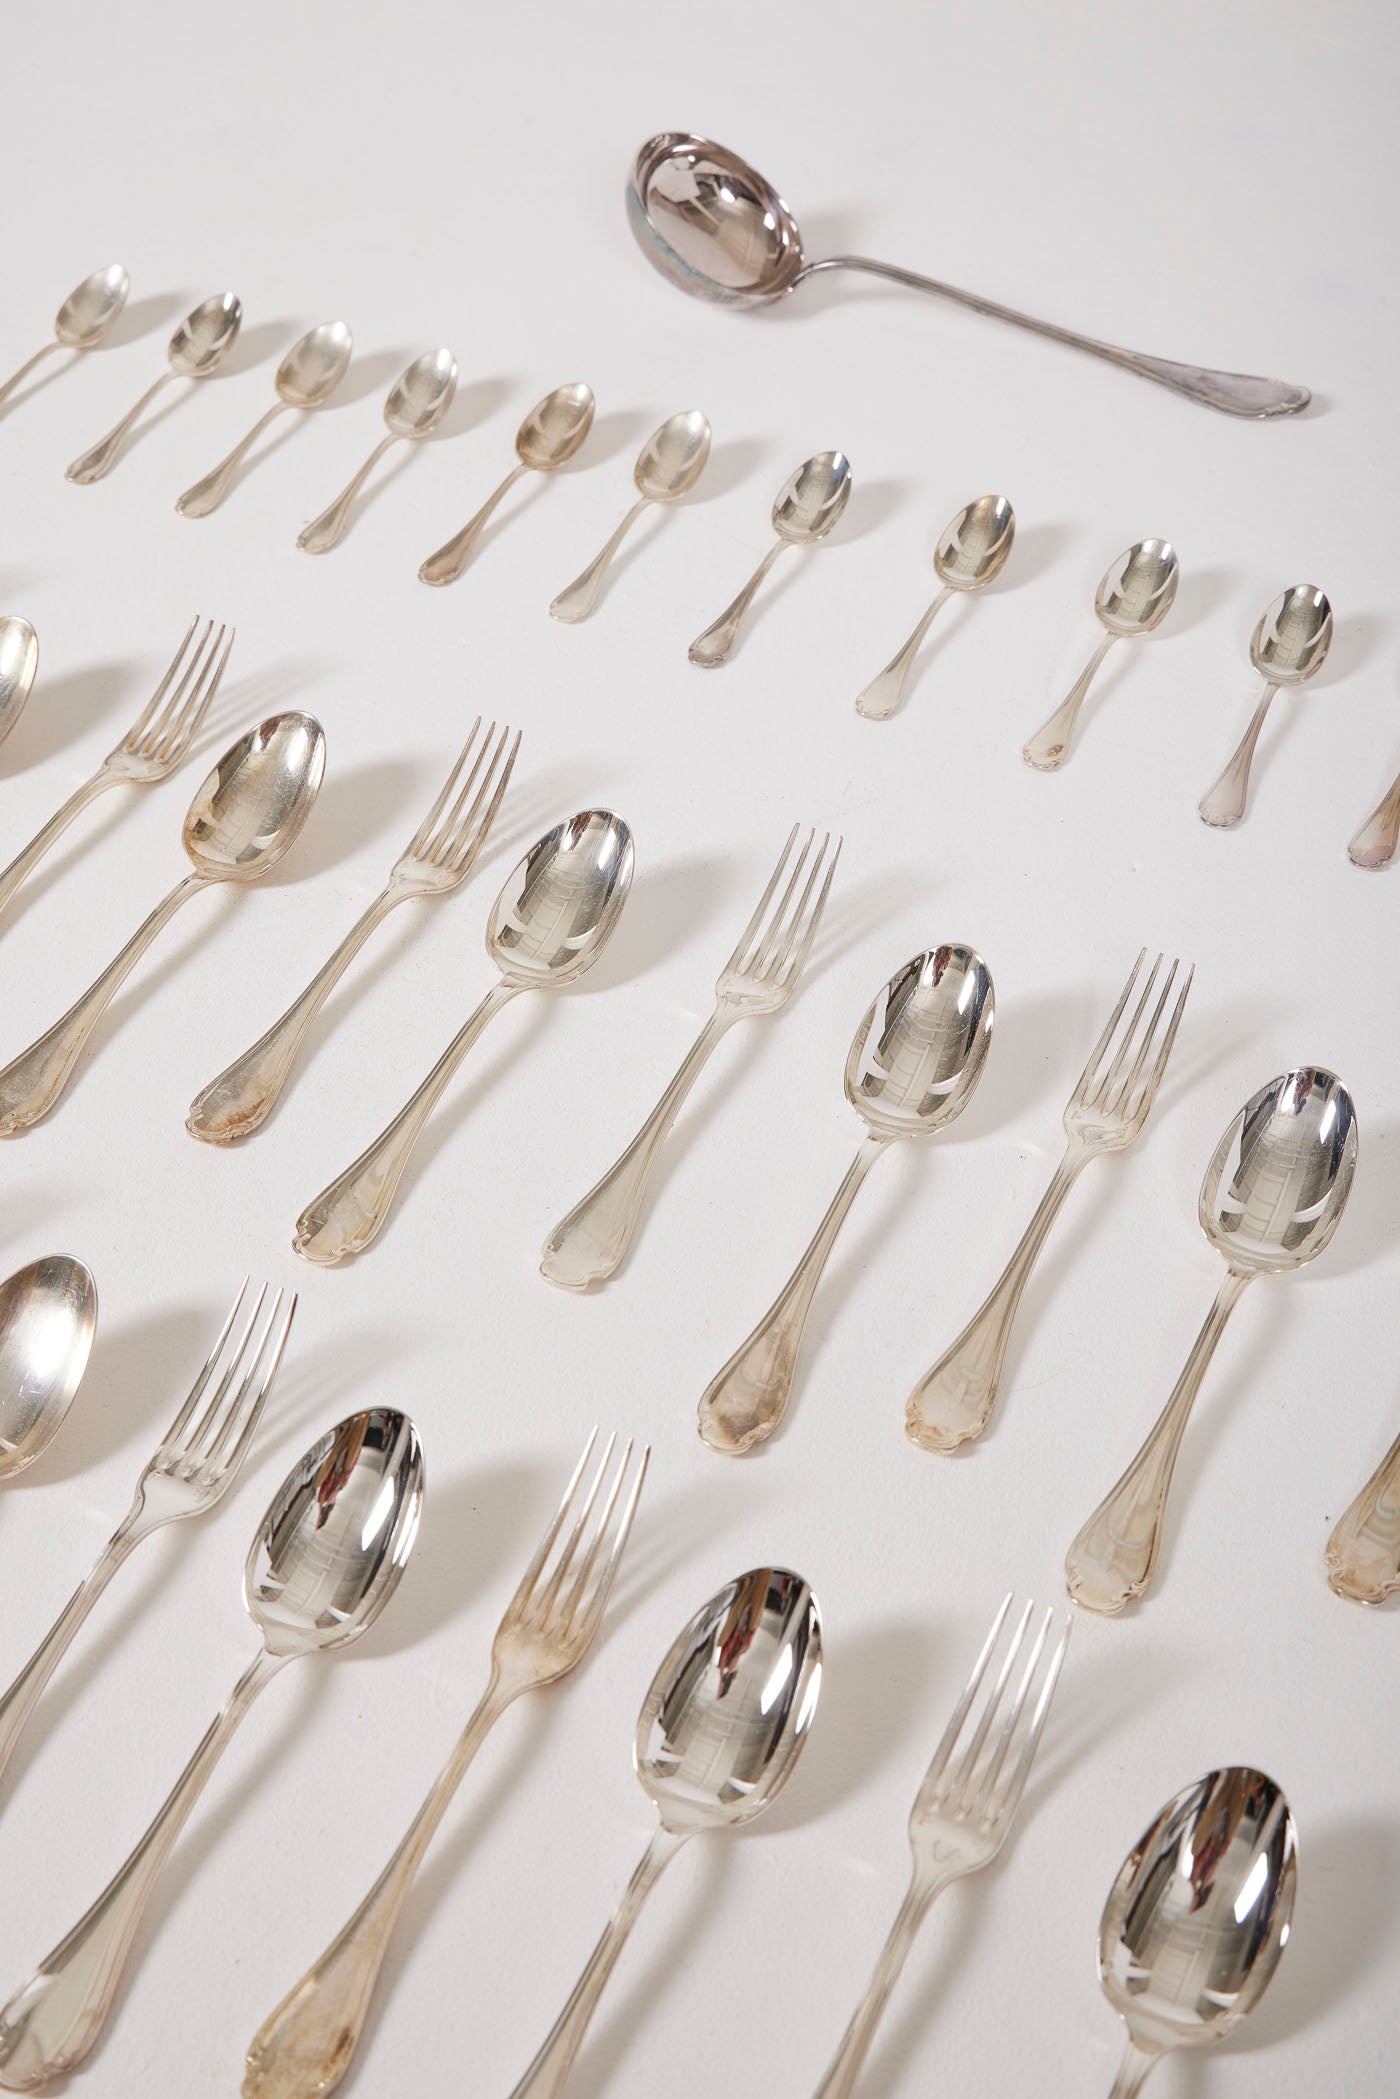 Christofle cutlery 37 pieces